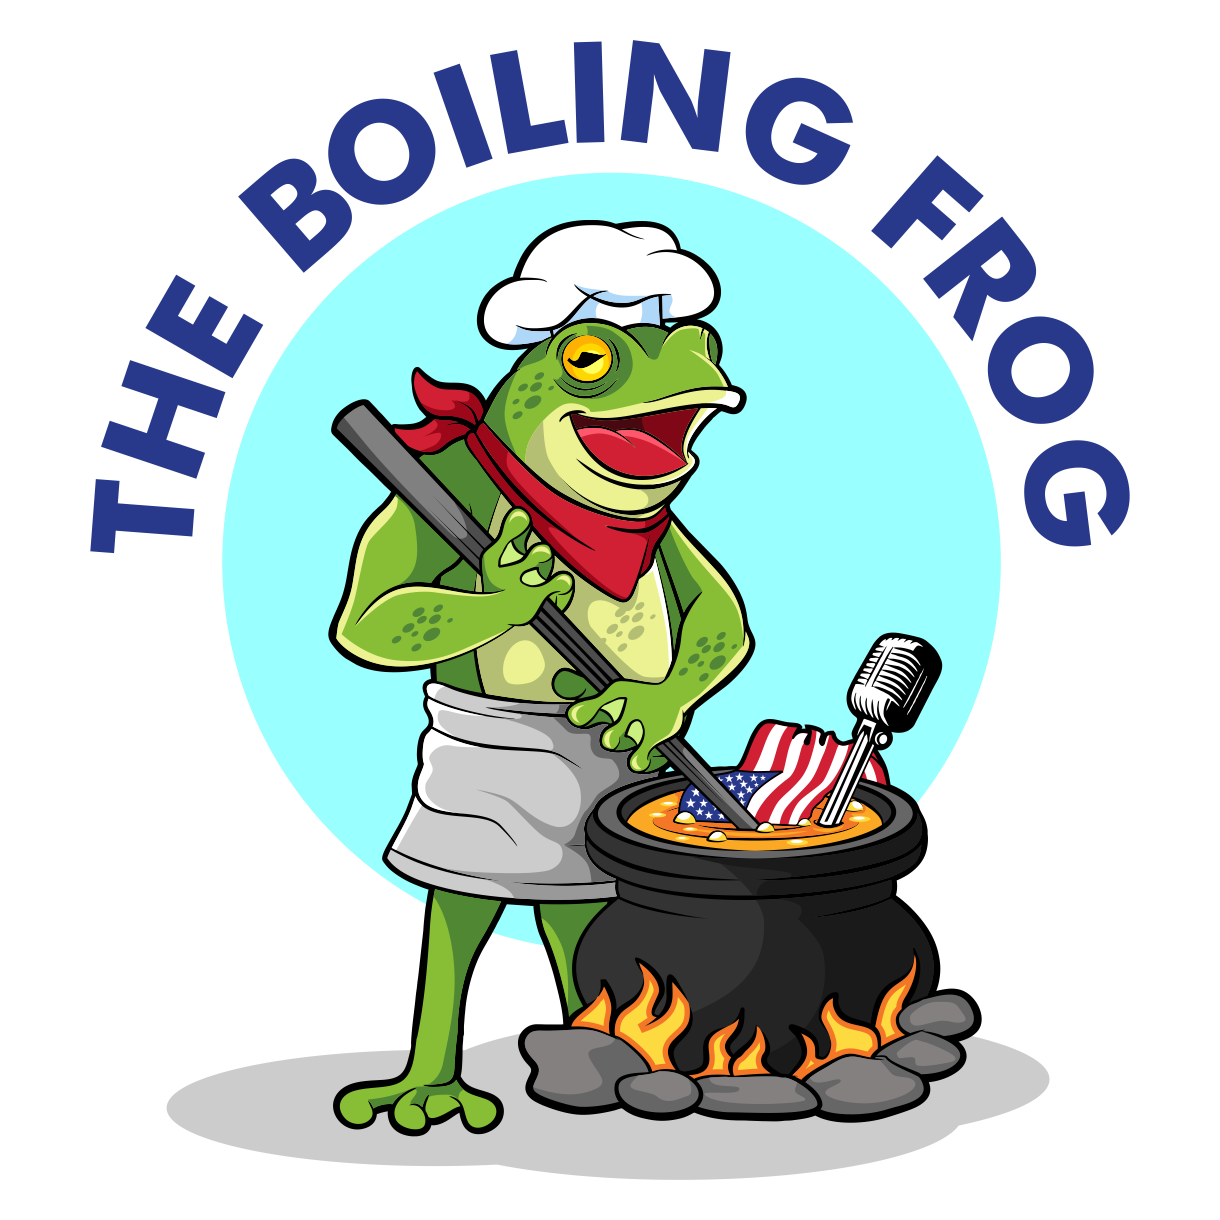 https://www.theboilingfrog.net/wp-content/uploads/site-graphics/logo2.png